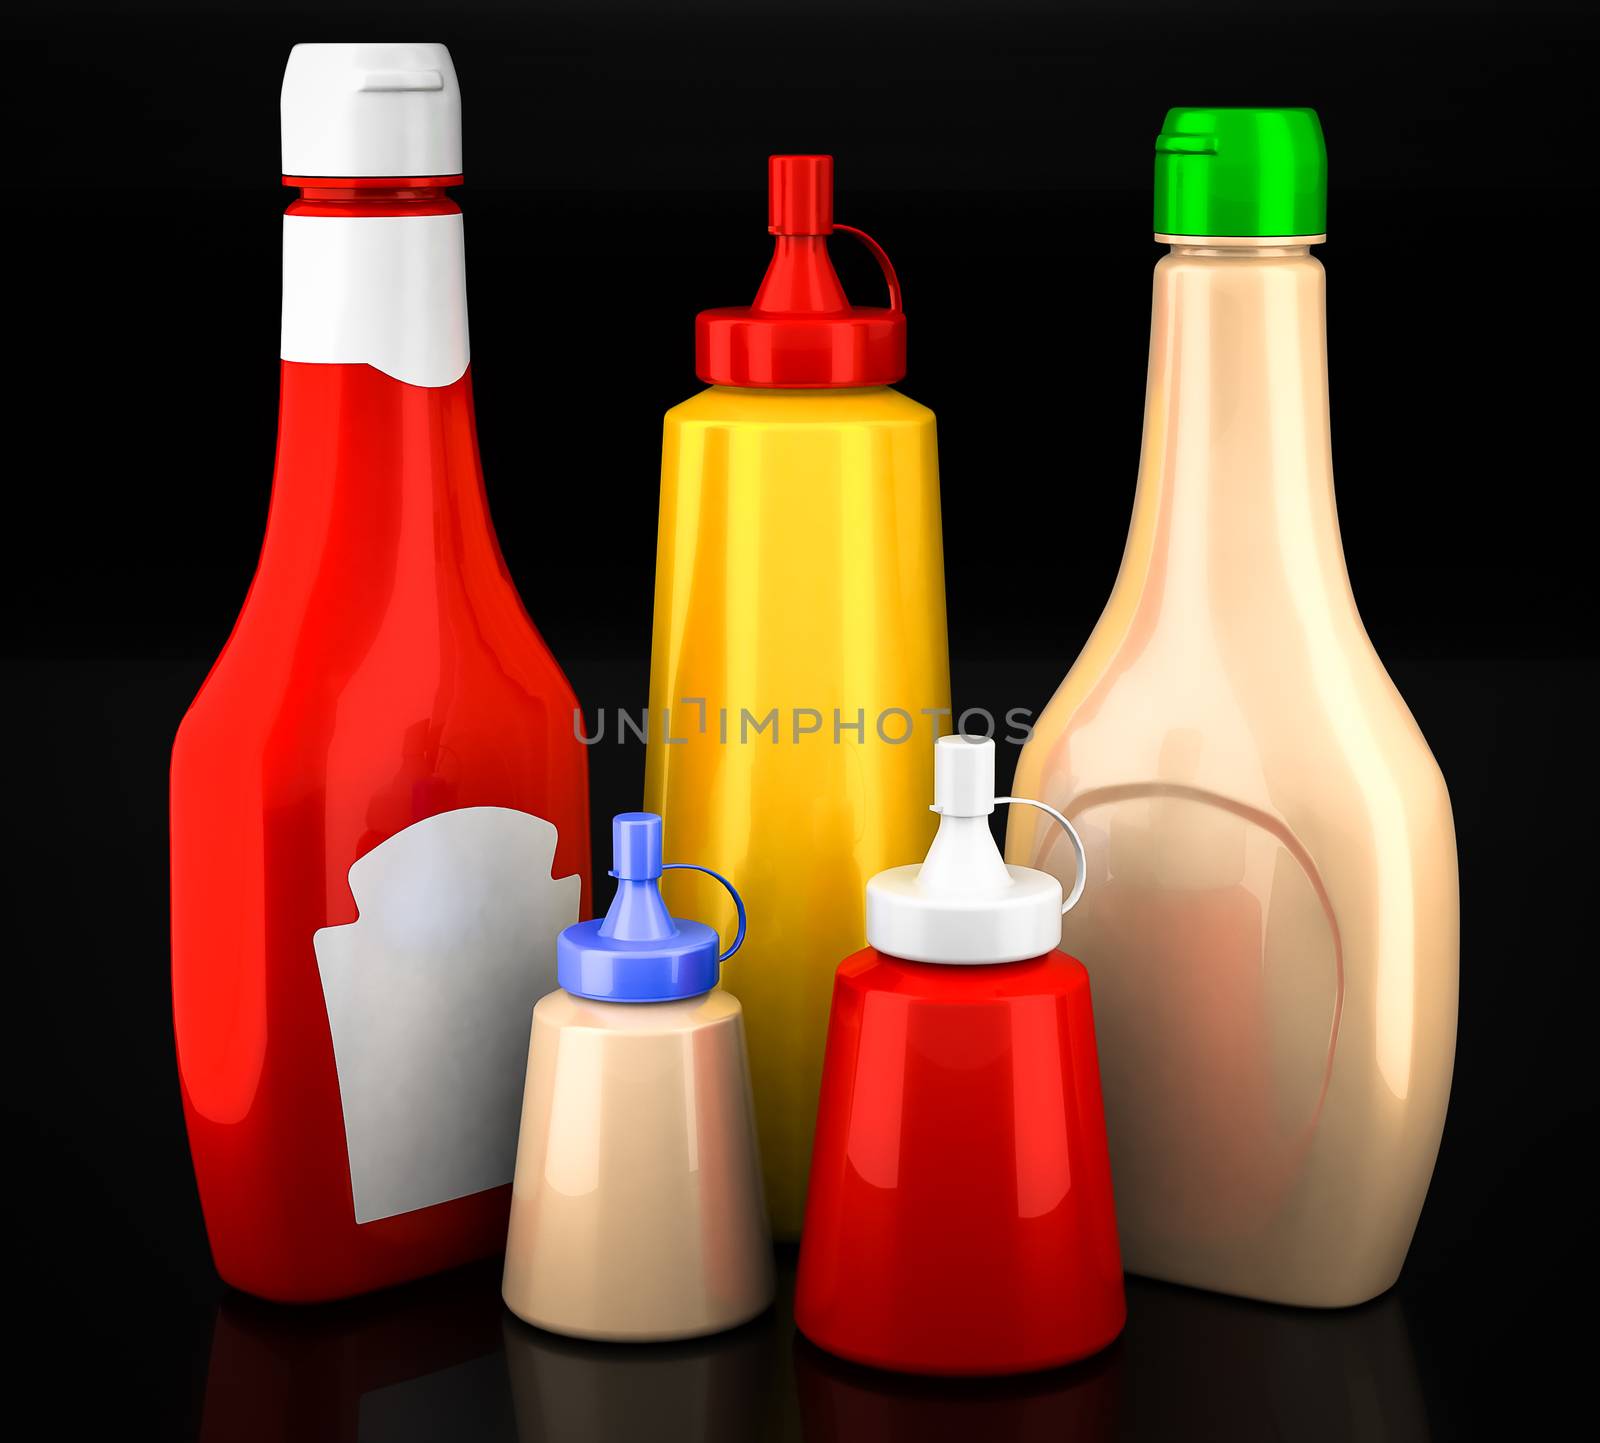 Bottles of ketchup, mustard and mayonnaise on a black background